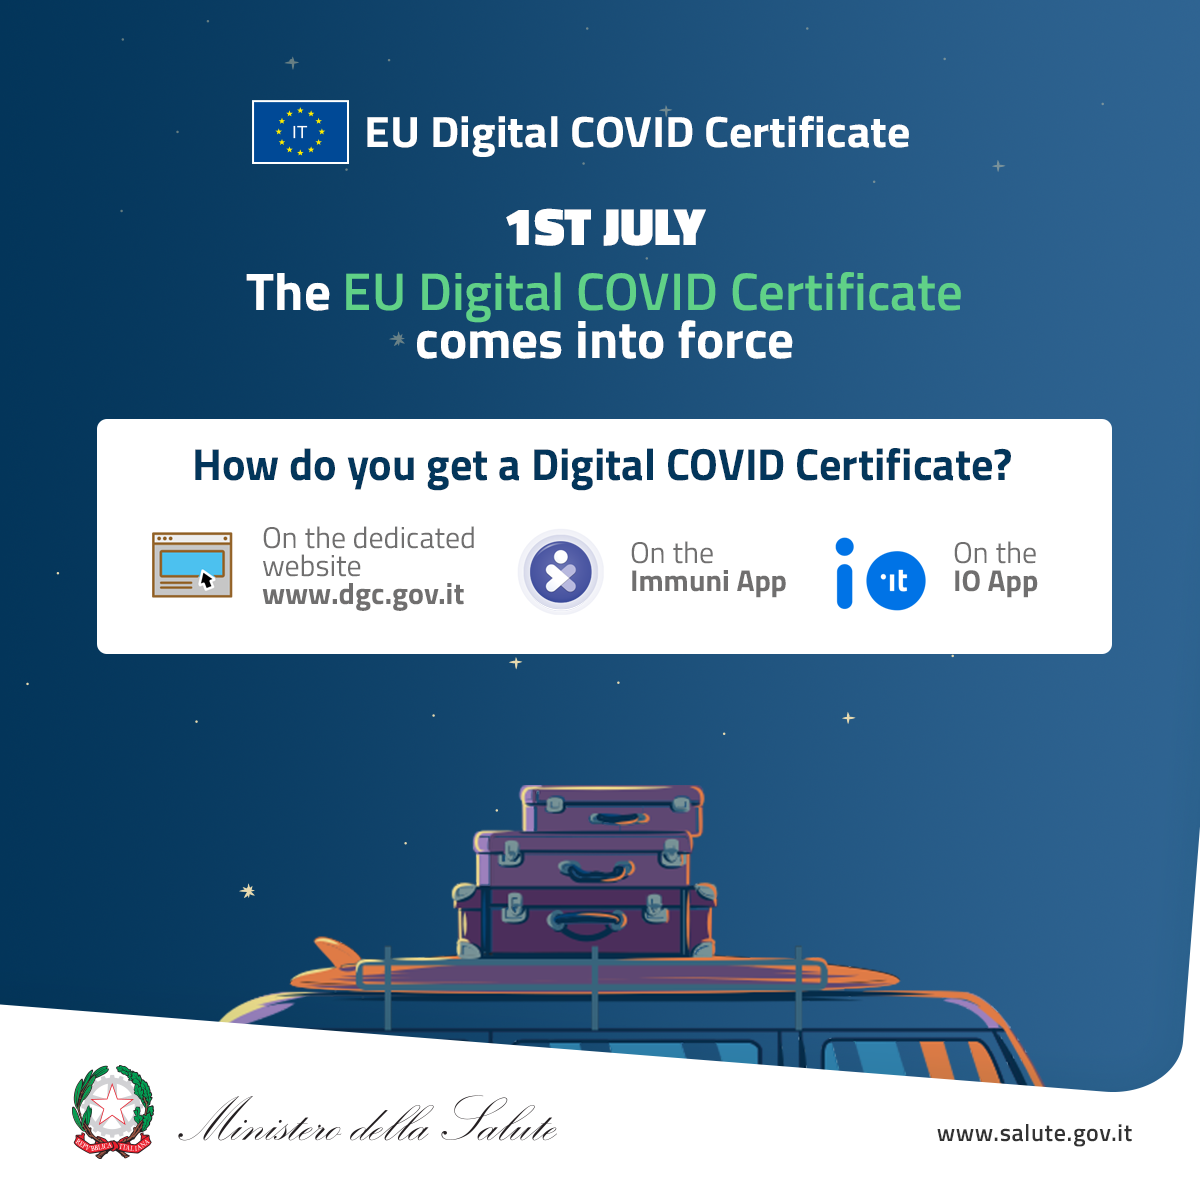 1ST JULY - EU Digital COVID Certificate comes into force